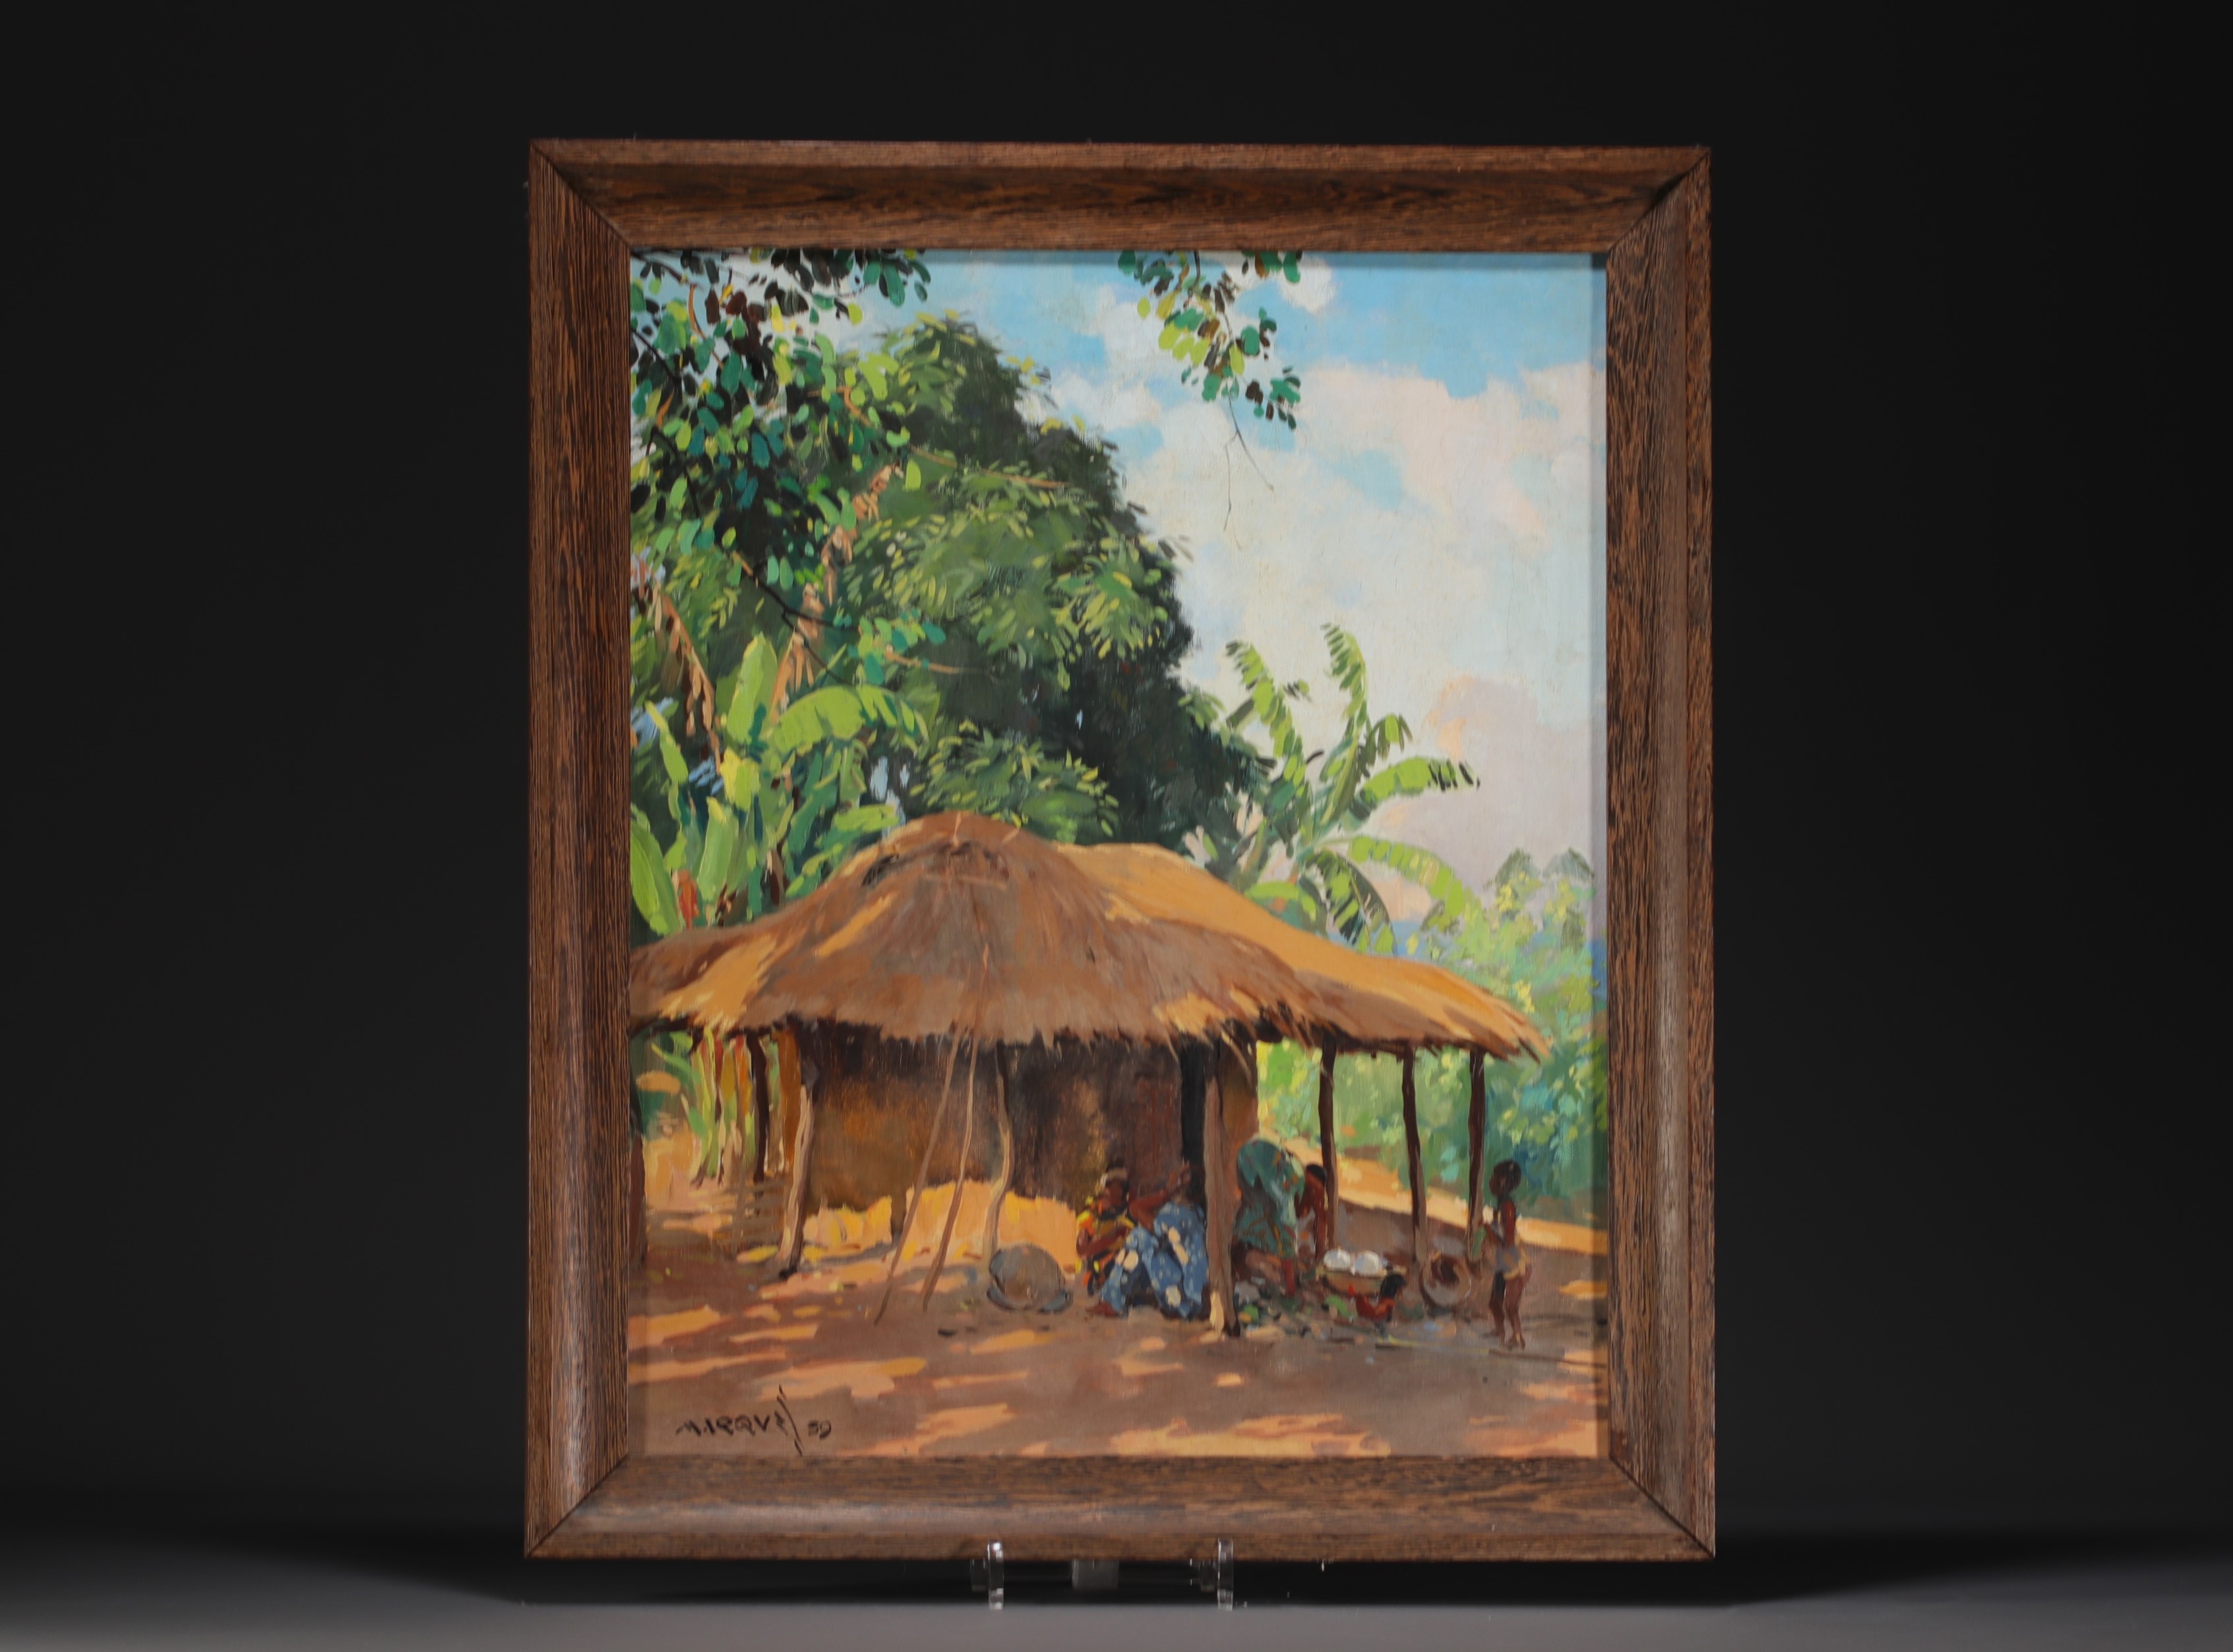 Guilherme MARQUES (1887-1960) "African Village" Oil on canvas, signed and dated 1939. - Image 2 of 2